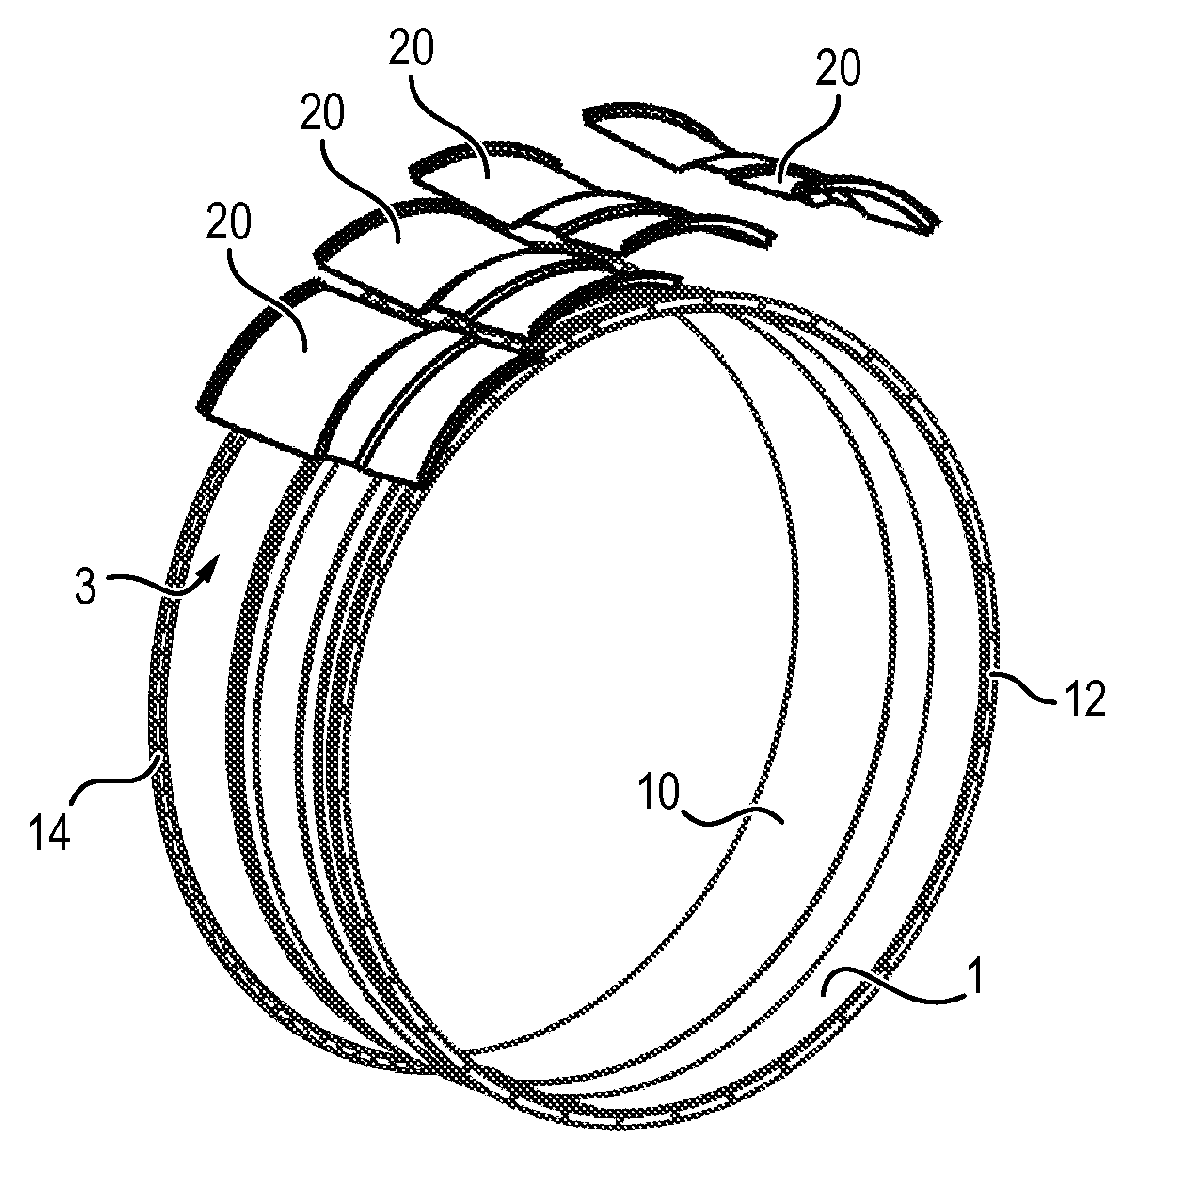 Fire protection of a part made of a three-dimensional woven composite material